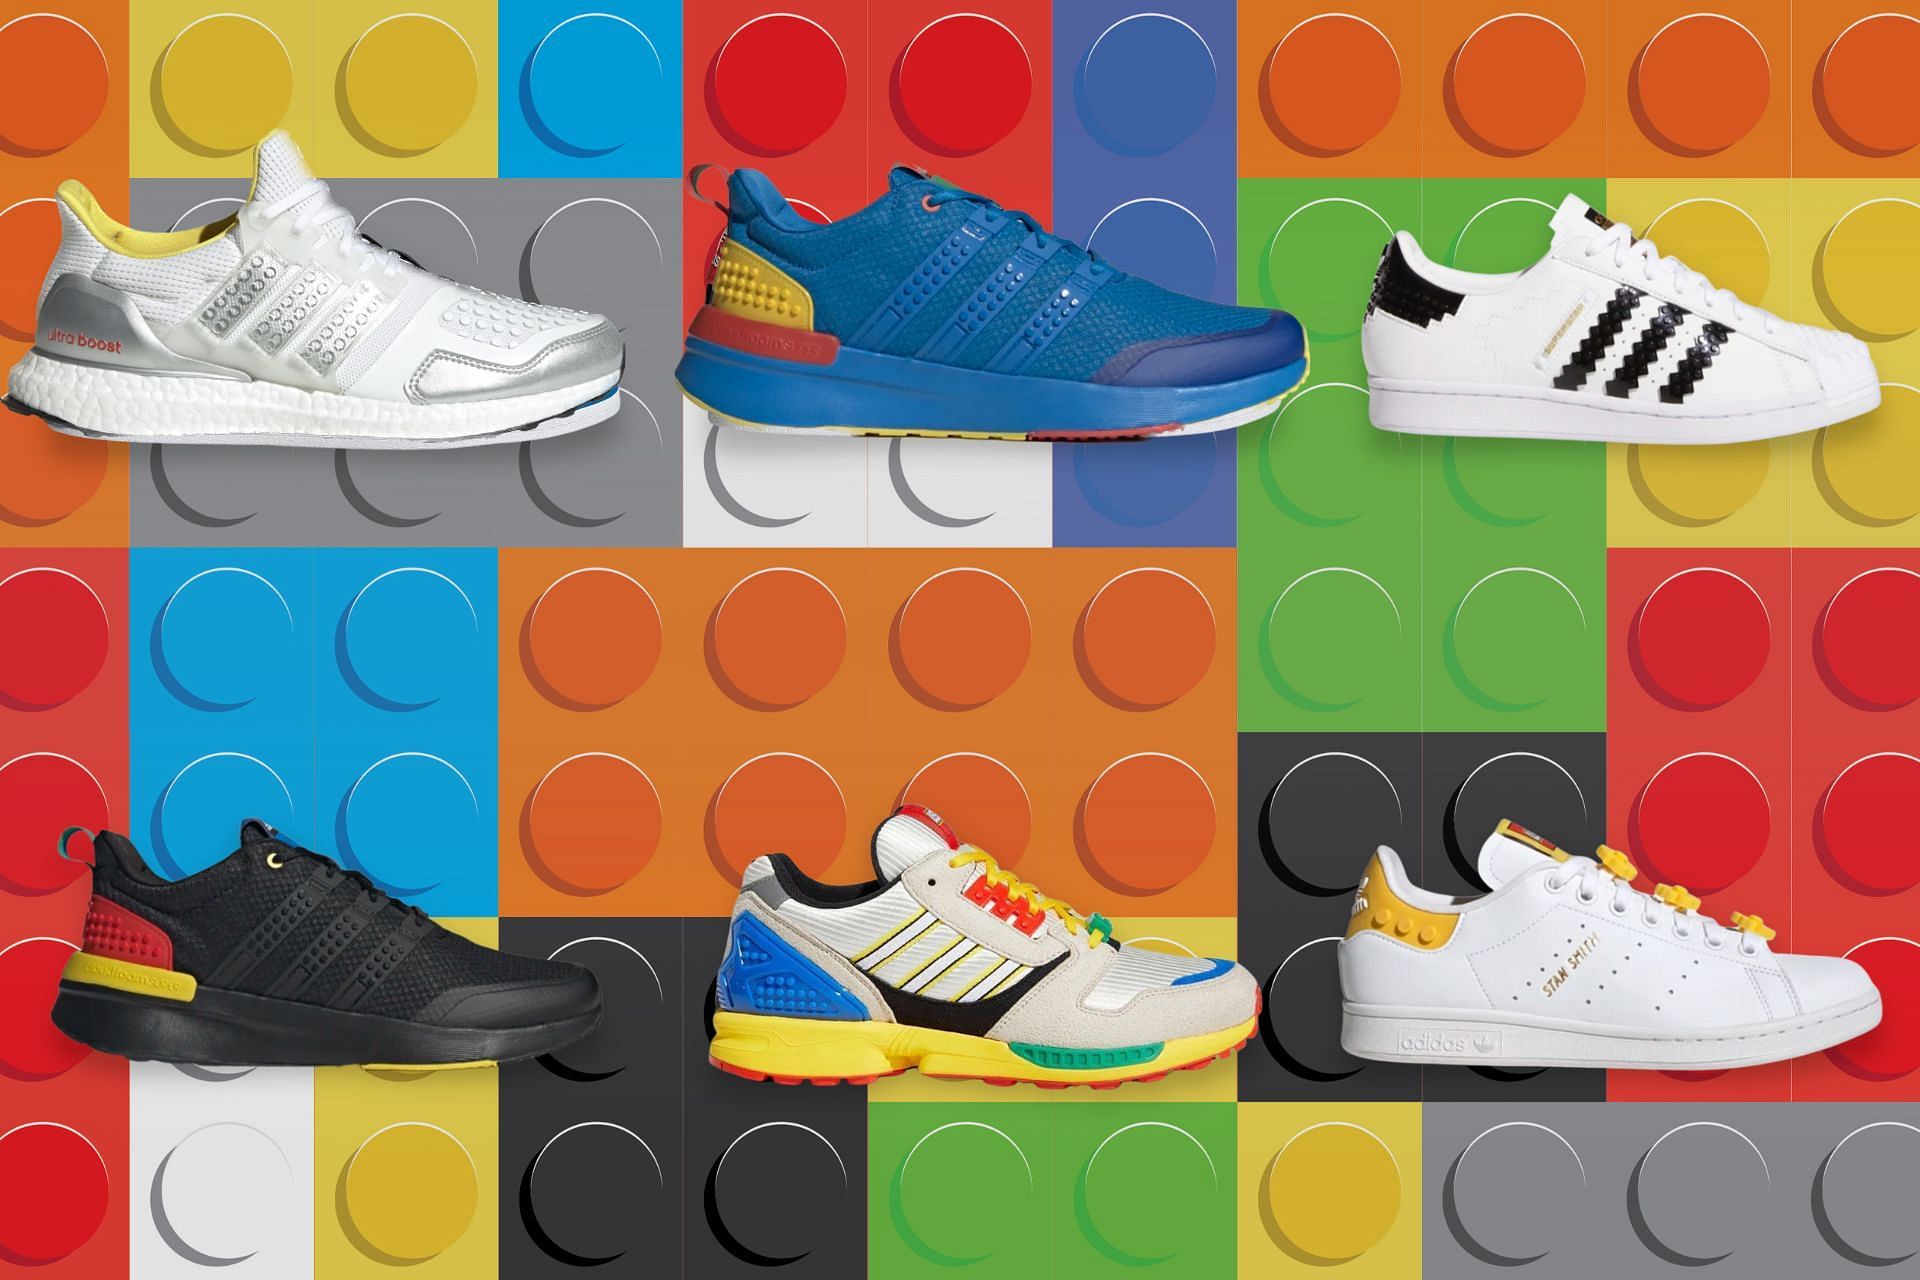 Adidas: 5 Best Lego X Adidas Sneaker Collabs Of All Time